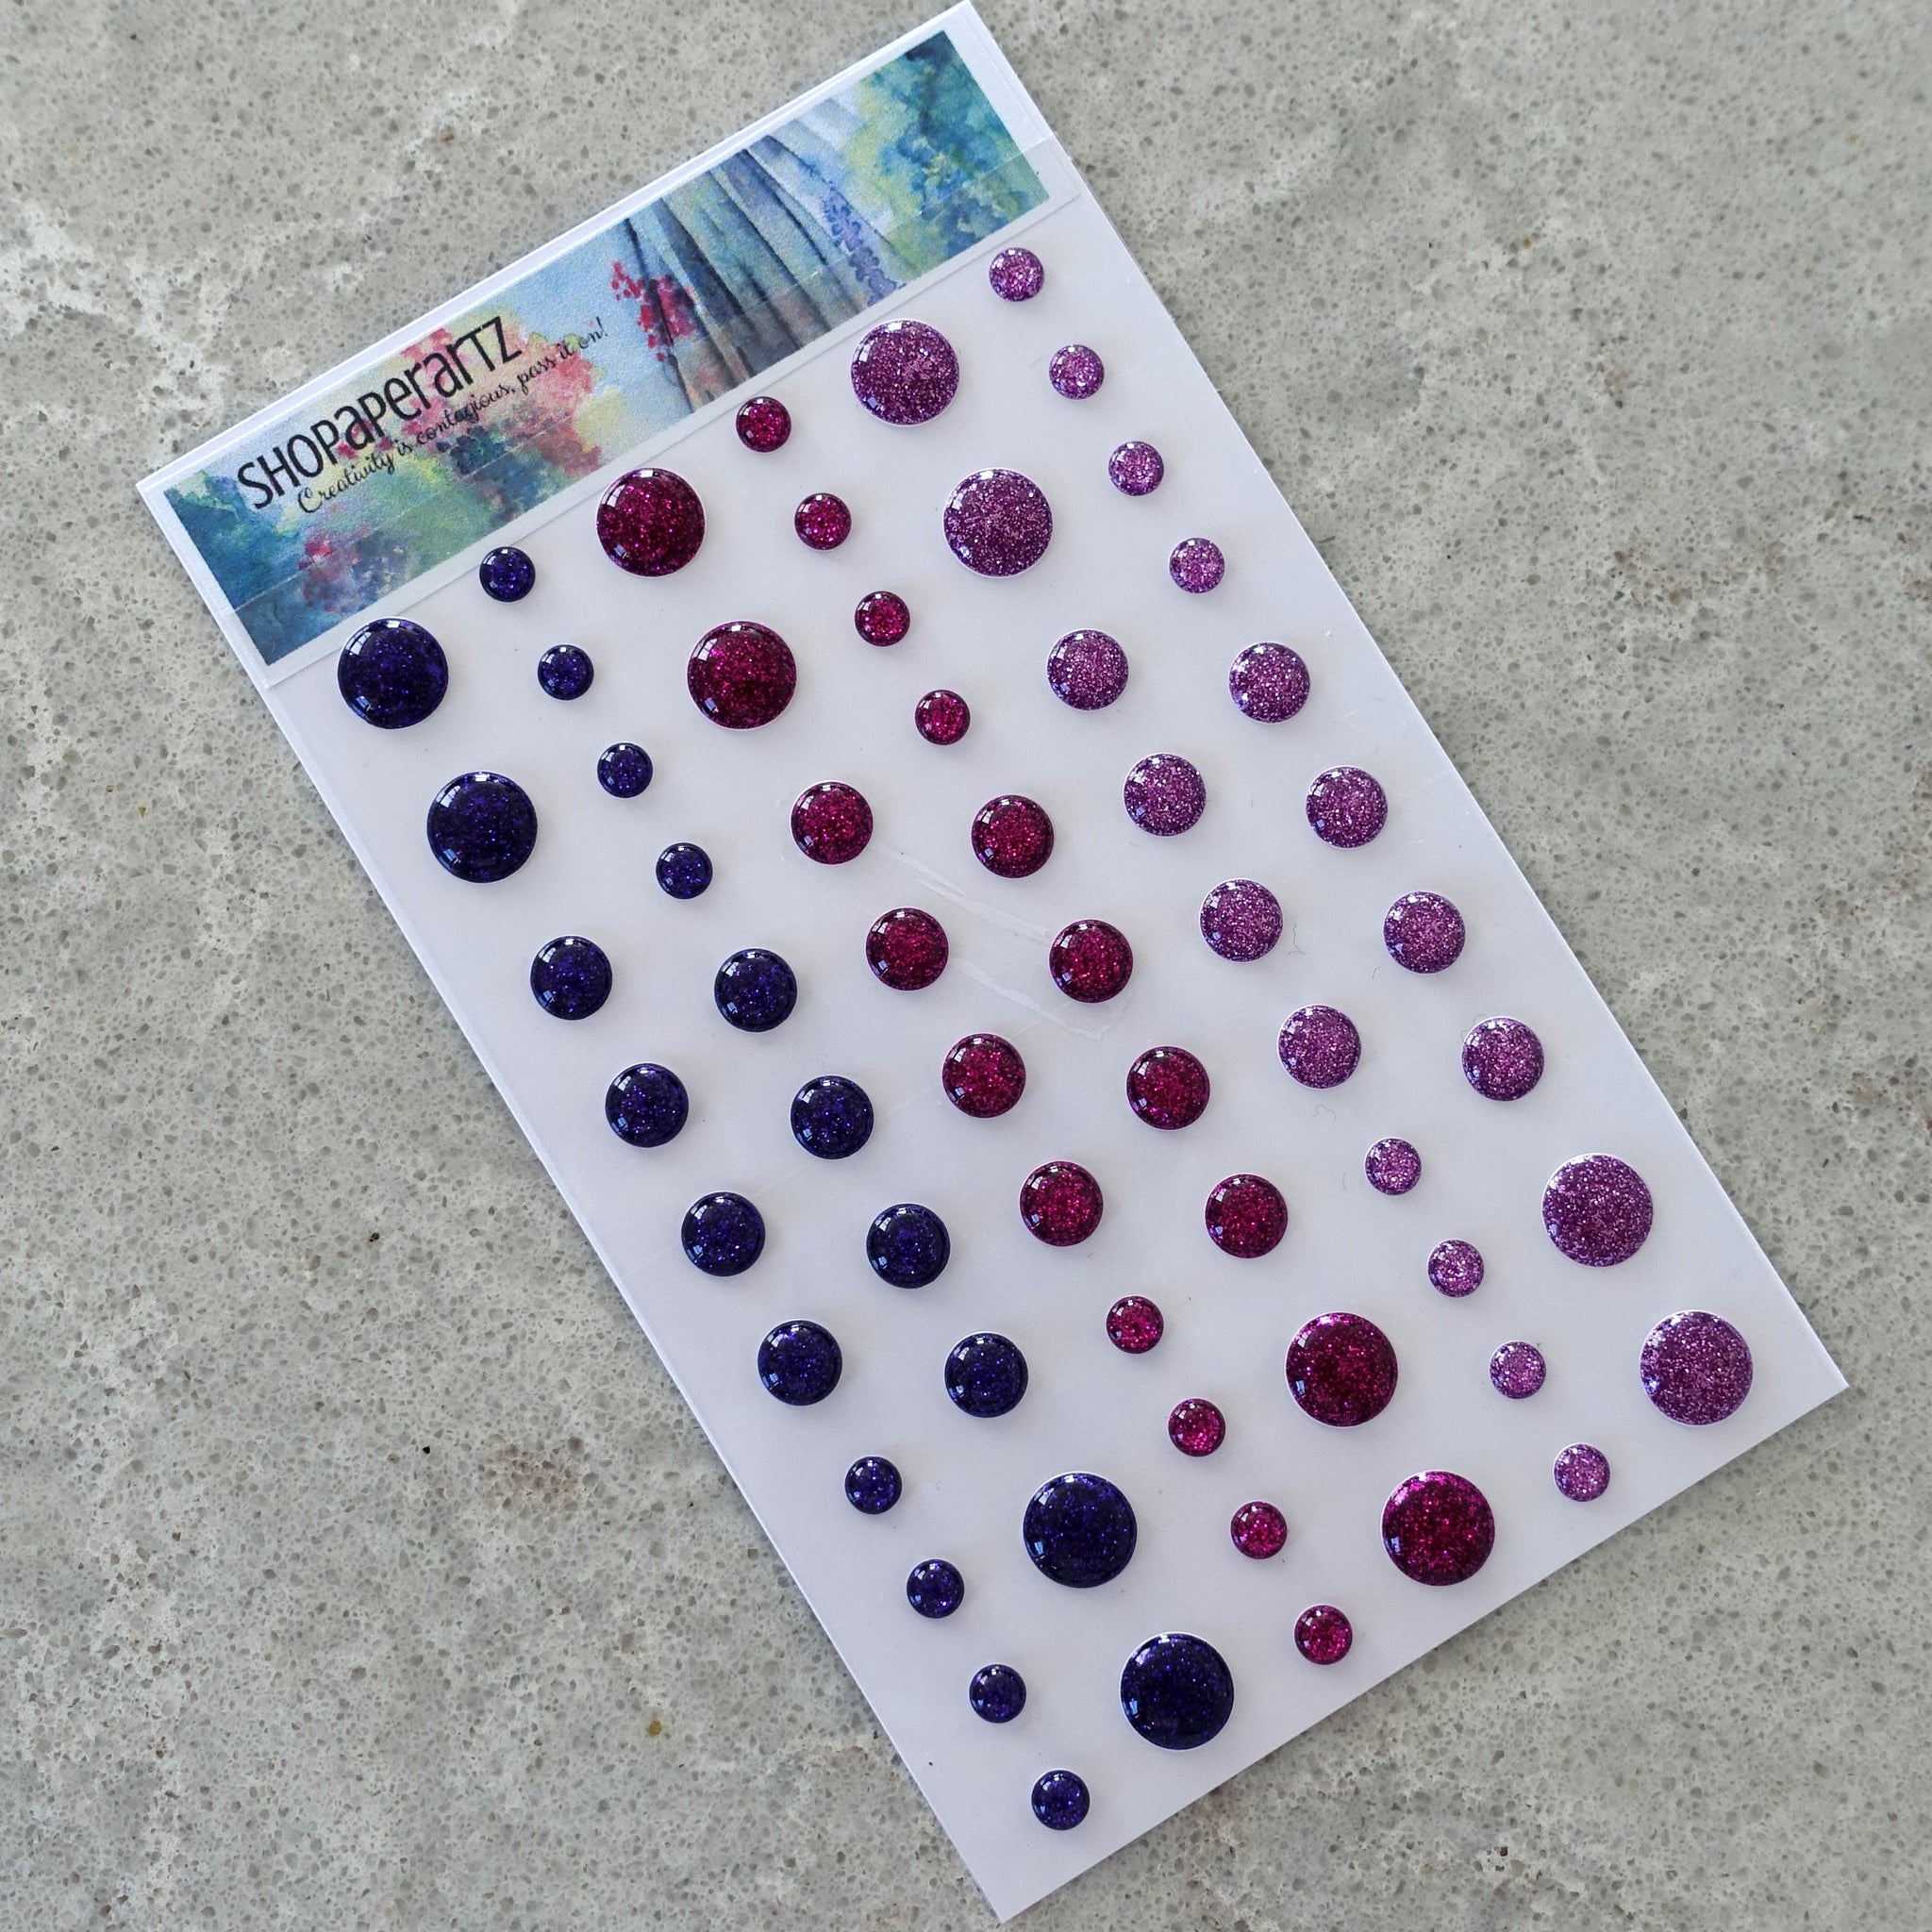 GLITTER ENAMEL DOTS SHADES OF PURPLE EMBELLISHMENTS ACCENTS SELF-ADHESIVE 60 PIECES CARDMAKING